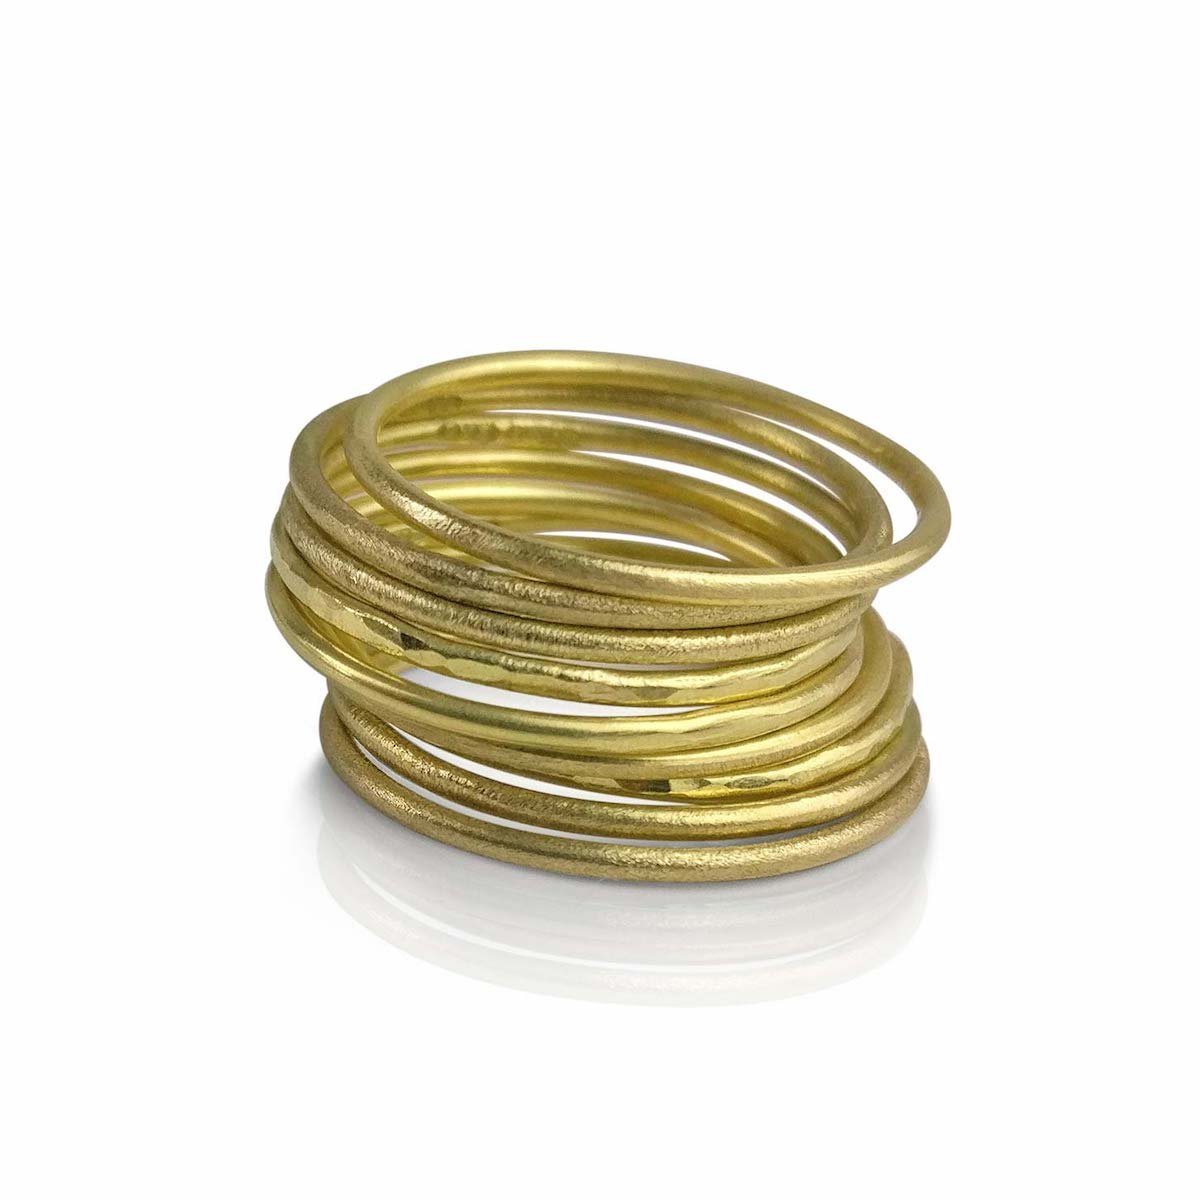 18ct-gold-mini-stacking-rings-9-catherinemarche-ethical.jpg